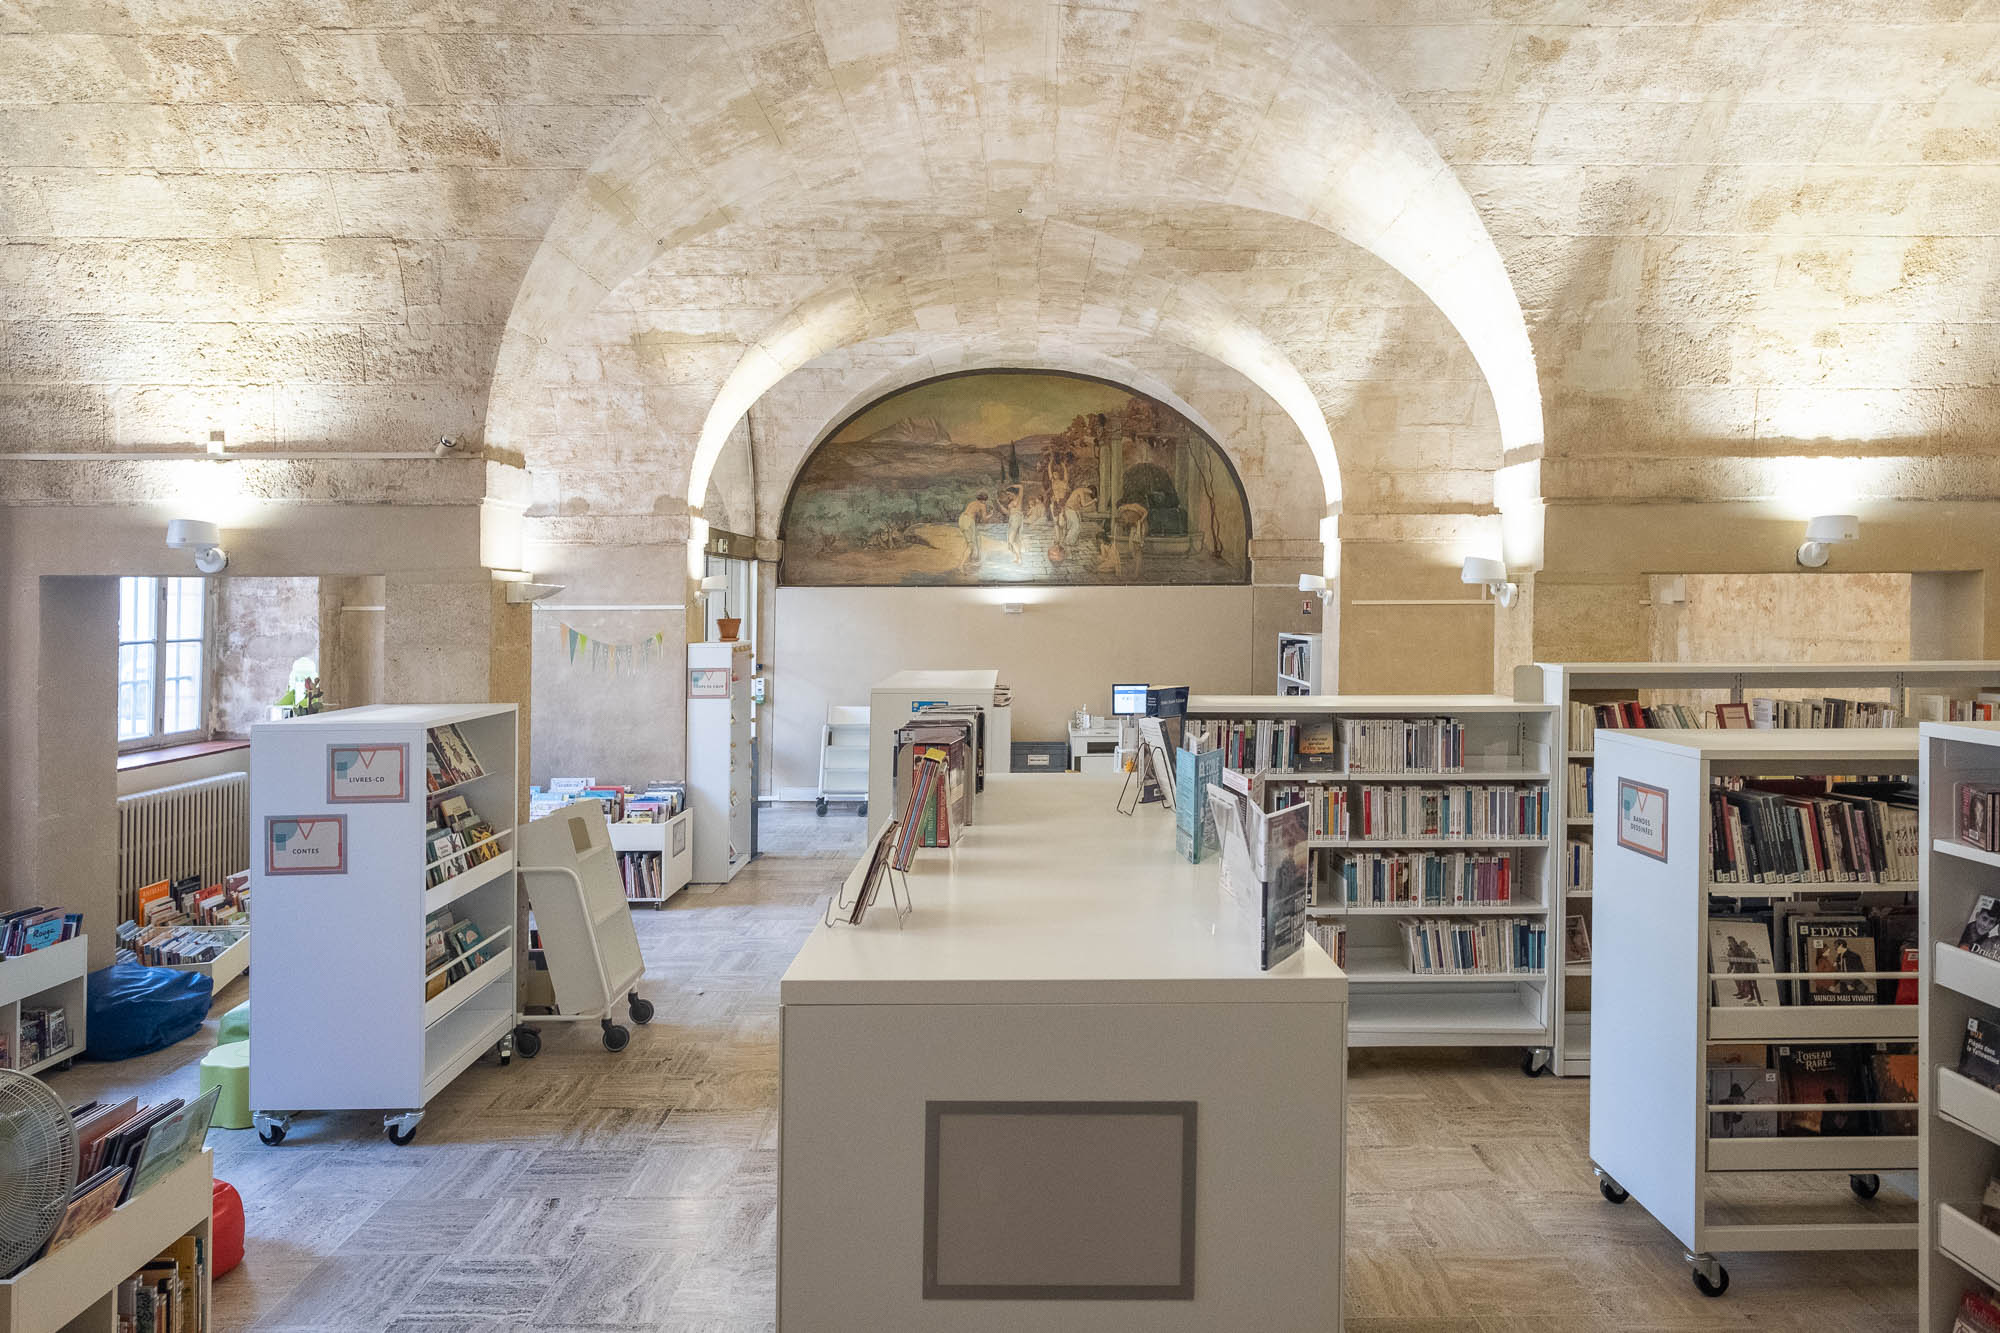 Interior of a library in a stone vaulted space with white modern bookshelves on wheels. A fresco showing a bathing scene is on the back wall.